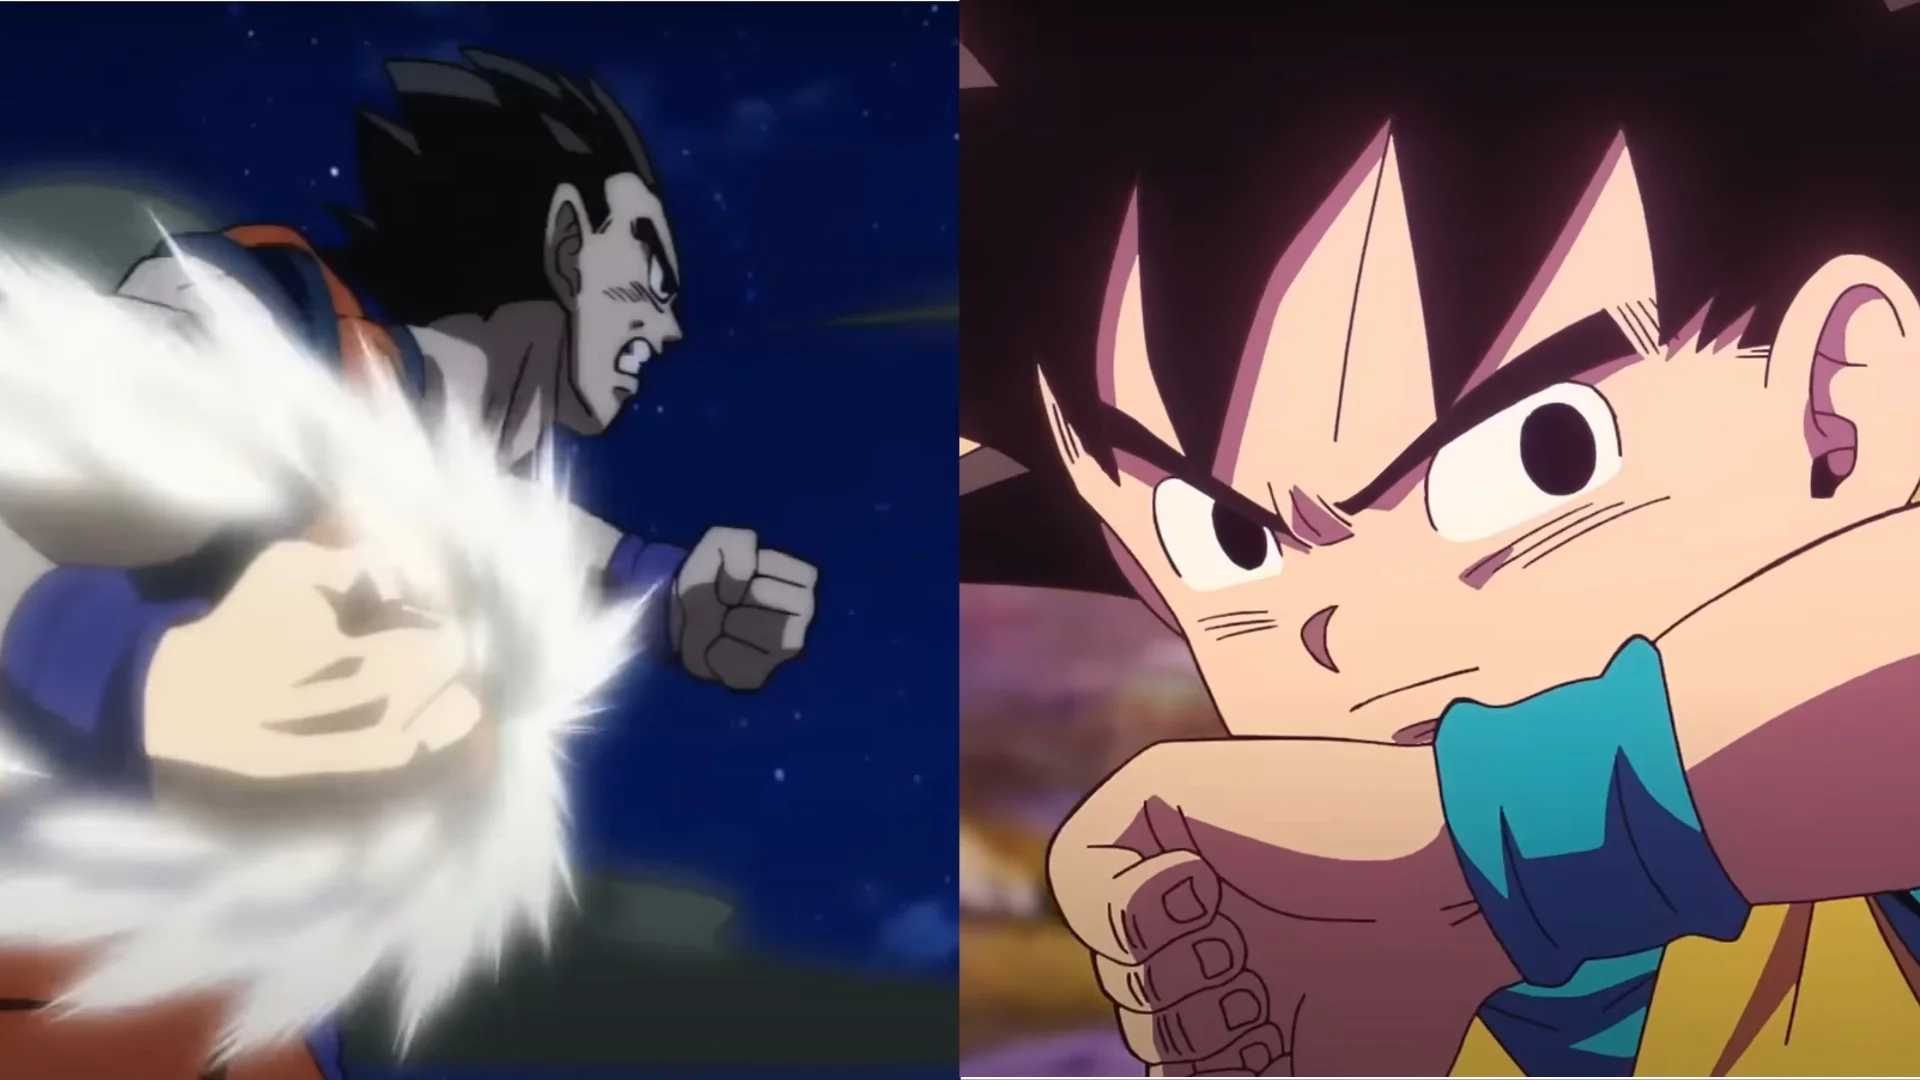 Kid Goku Returns in Dragon Ball Daima: Here’s Why Fans Are Having Mixed Feelings